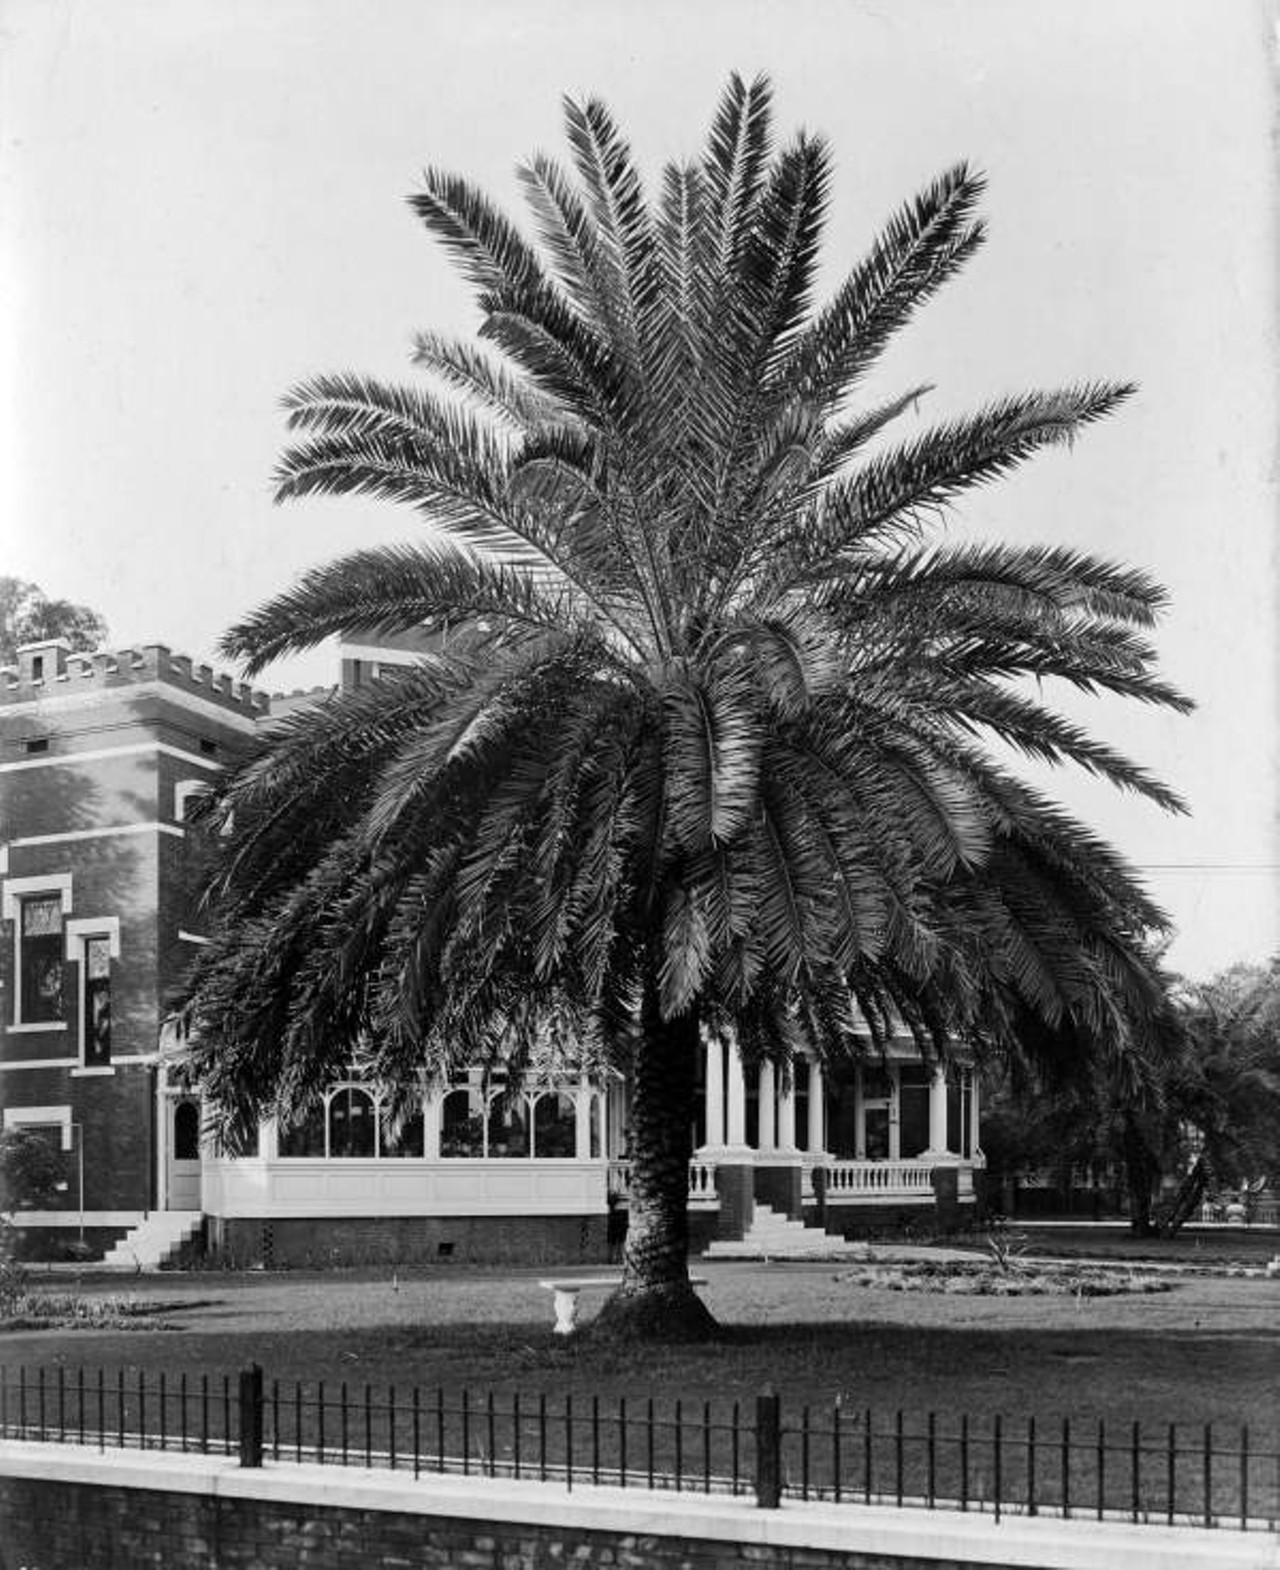 View showing a palm tree in front of the Peter O. Knight house in Tampa, 1919